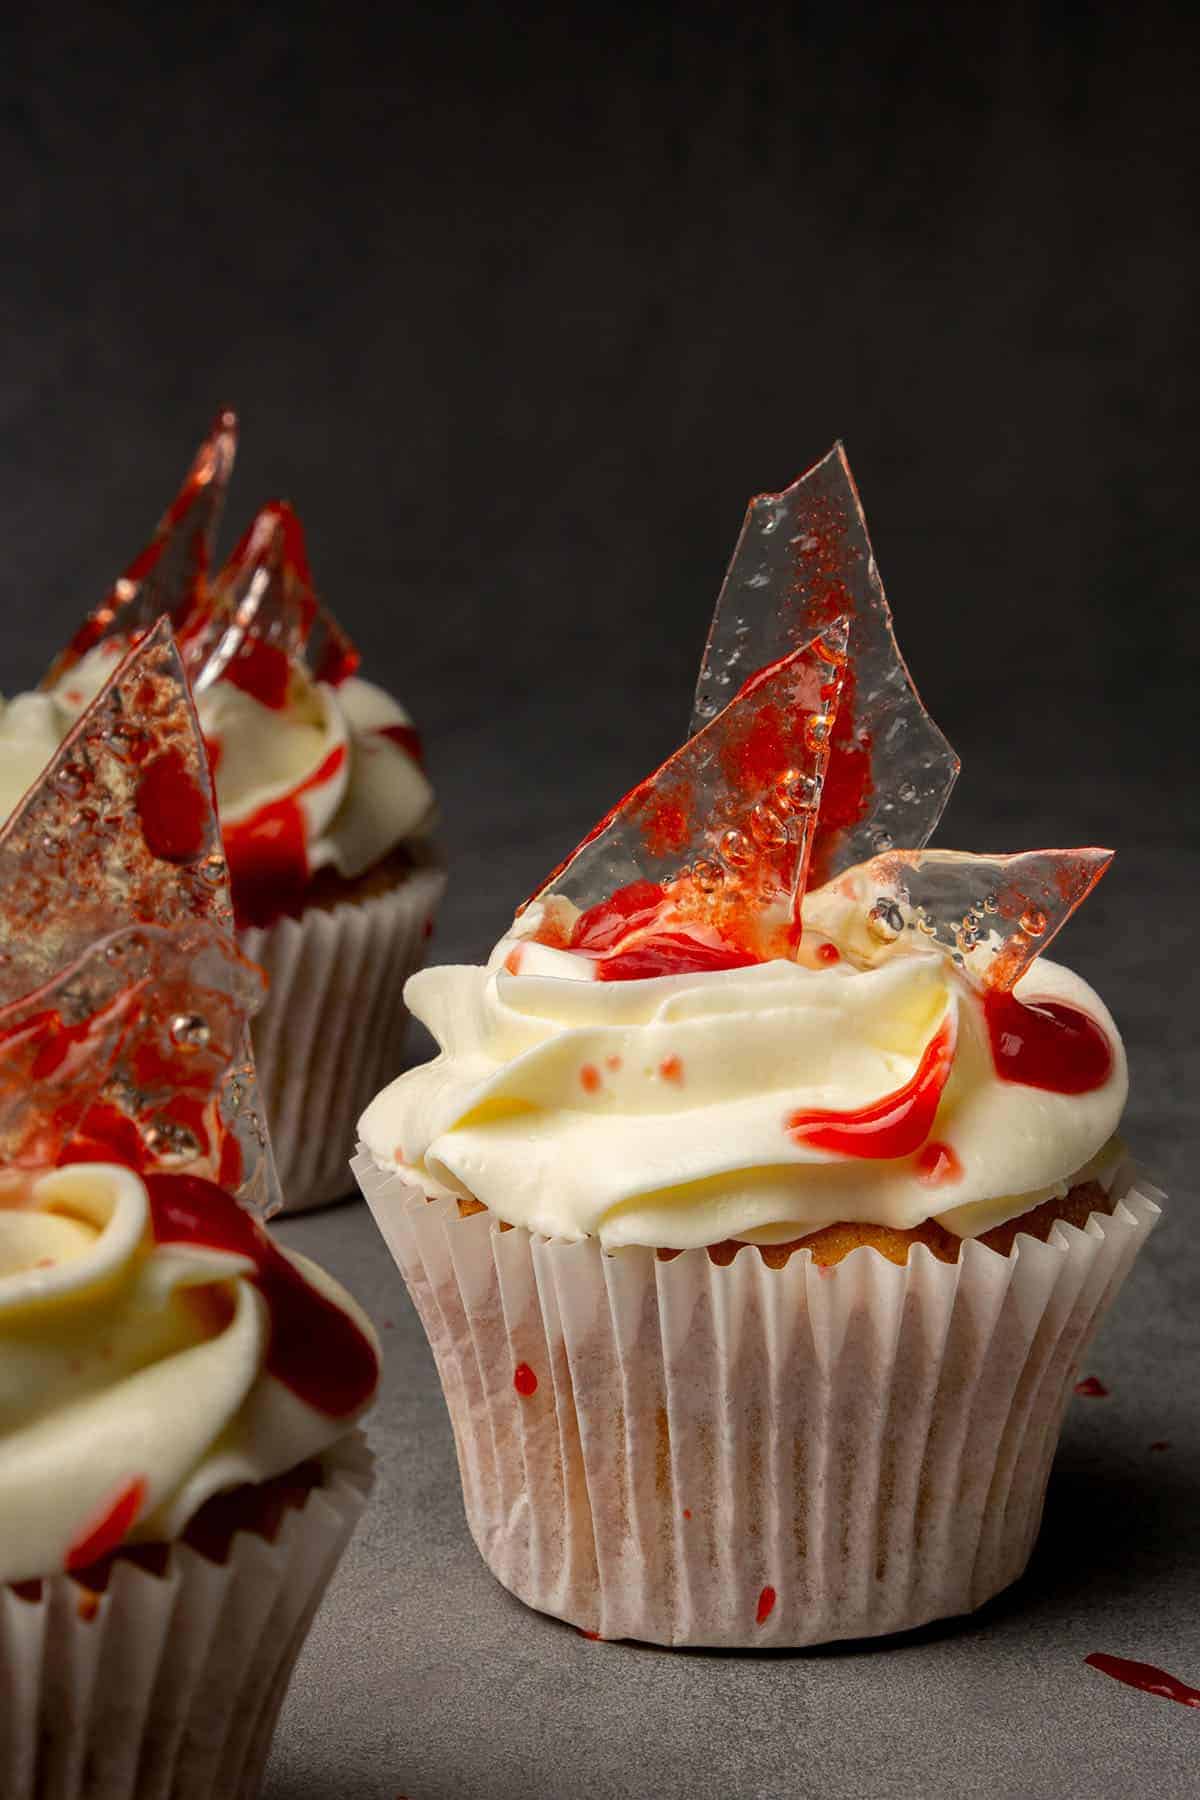 Close-up of a cupcake with a clear decoration that looks like bloody glass.